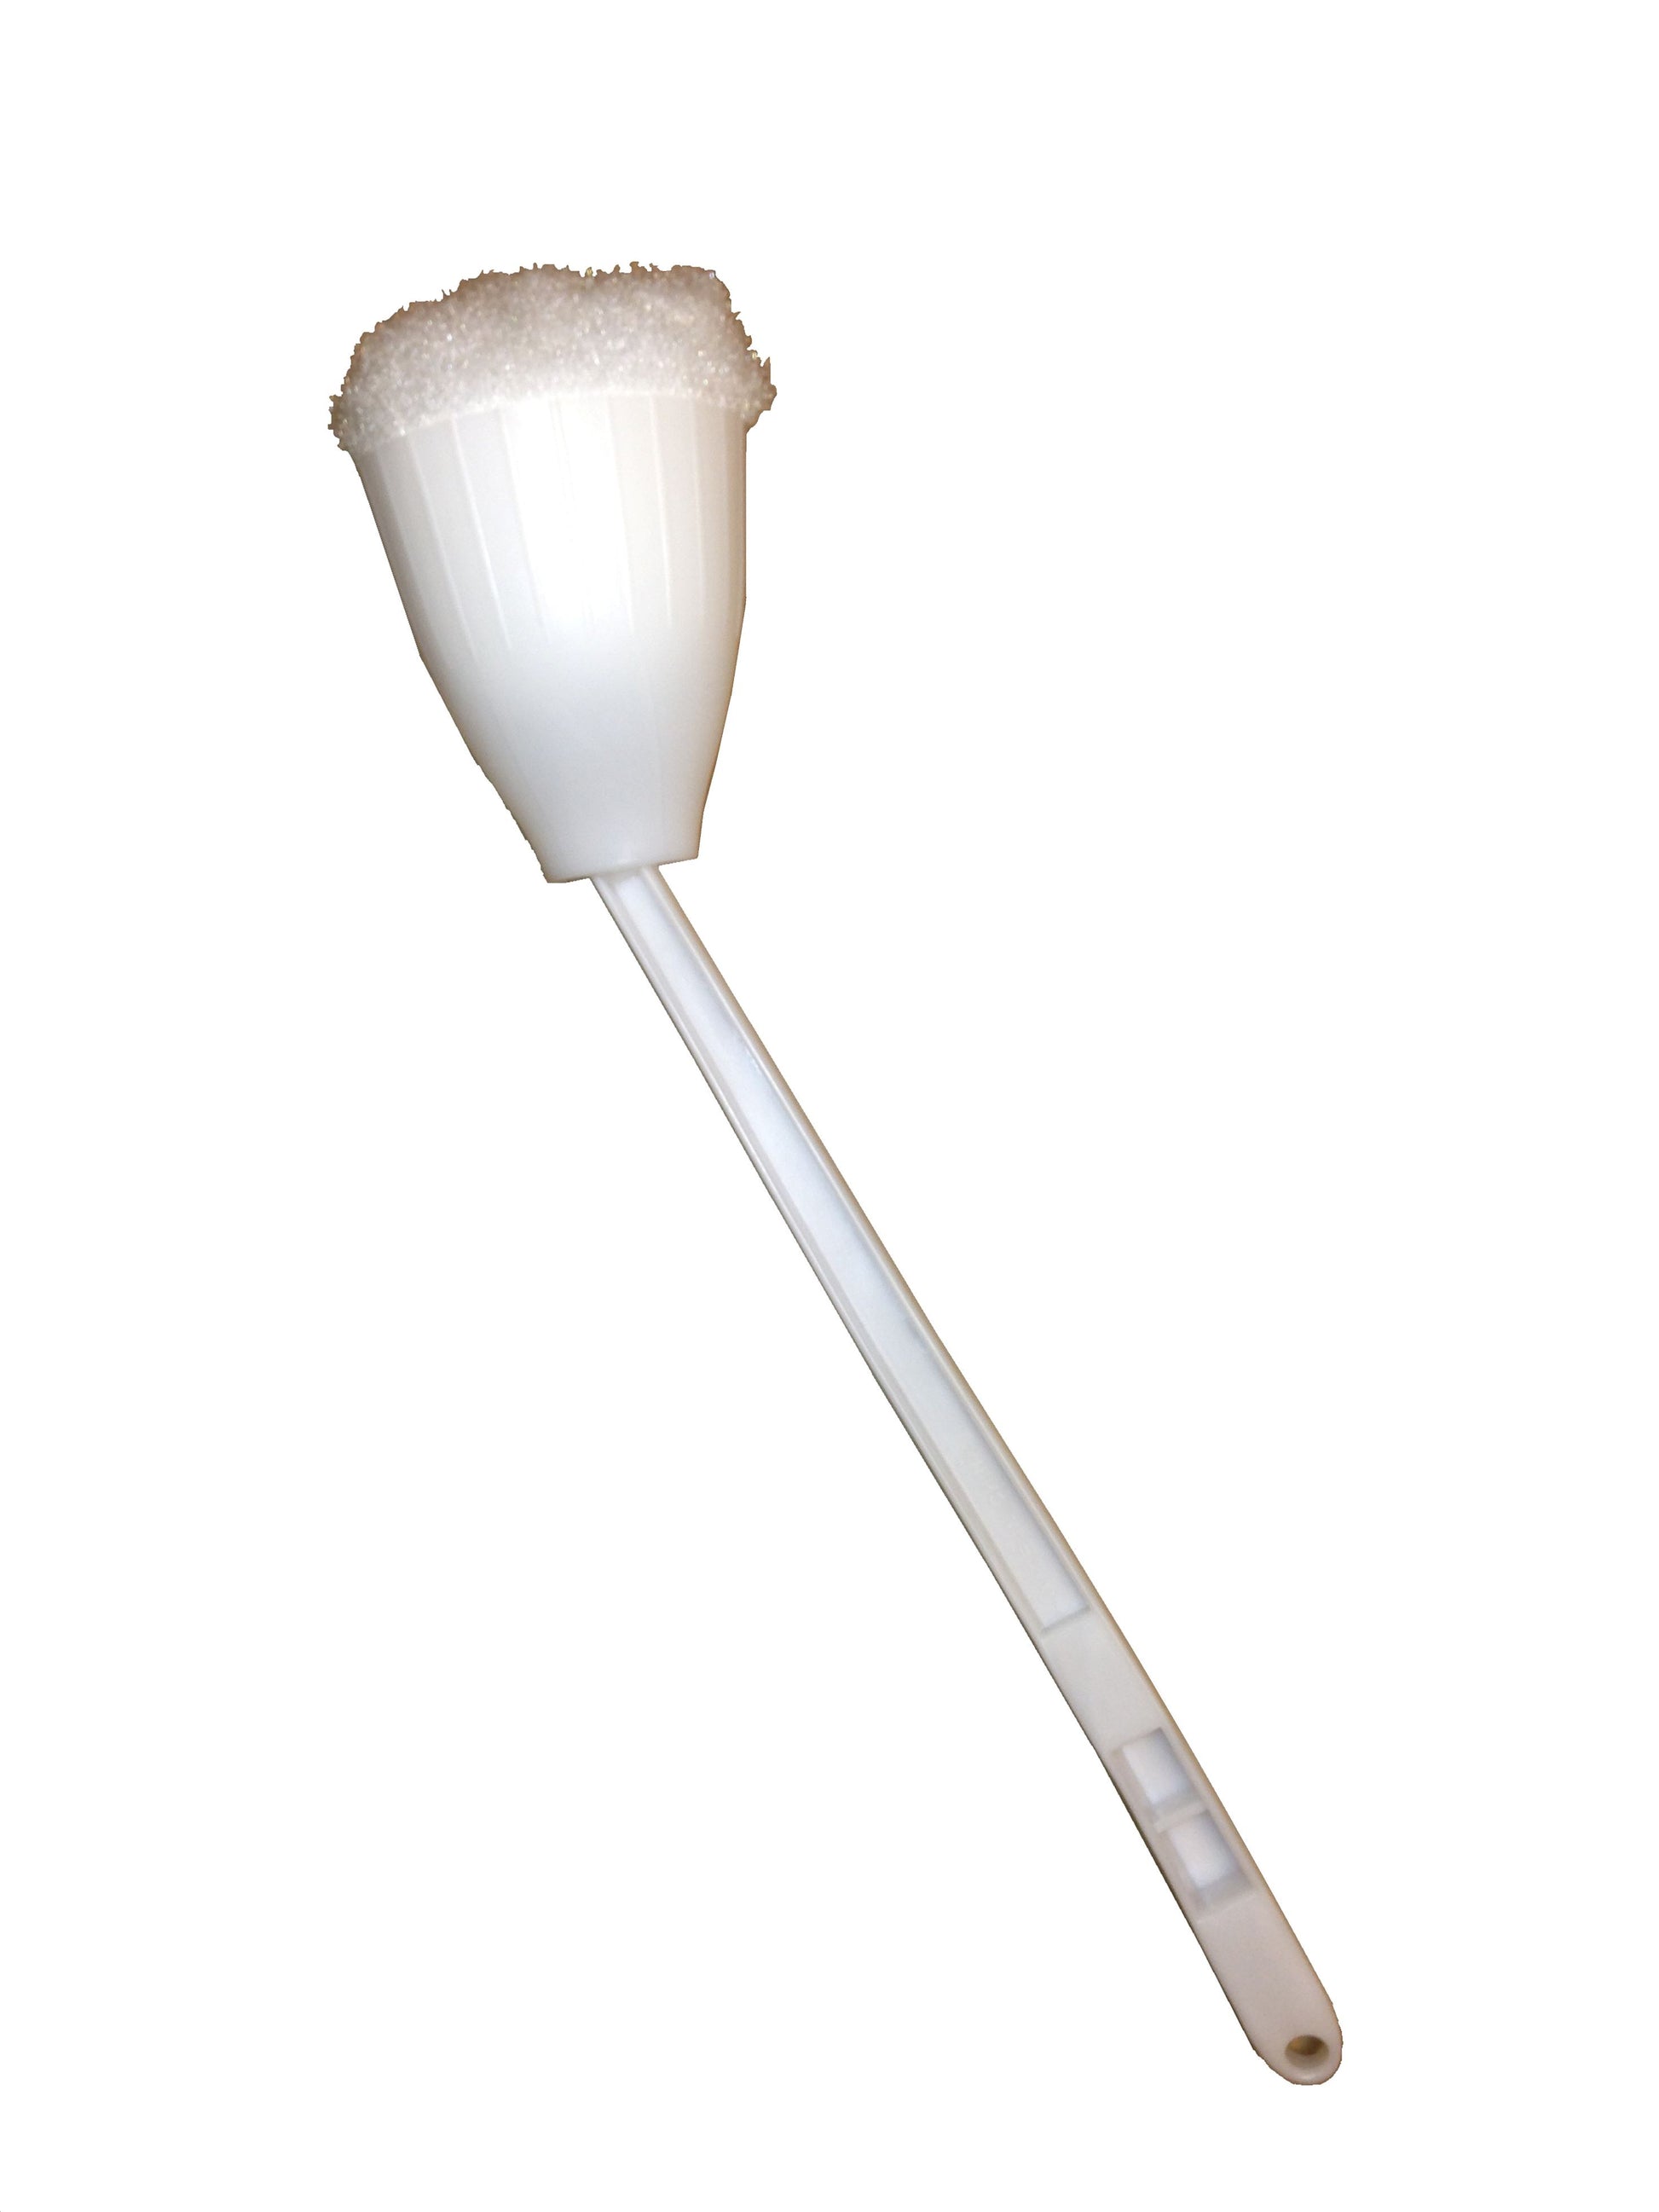 Caarolina Mop Toilet Cone Mop. made from durable synthetic fiber and has a 12' long plastic handle.